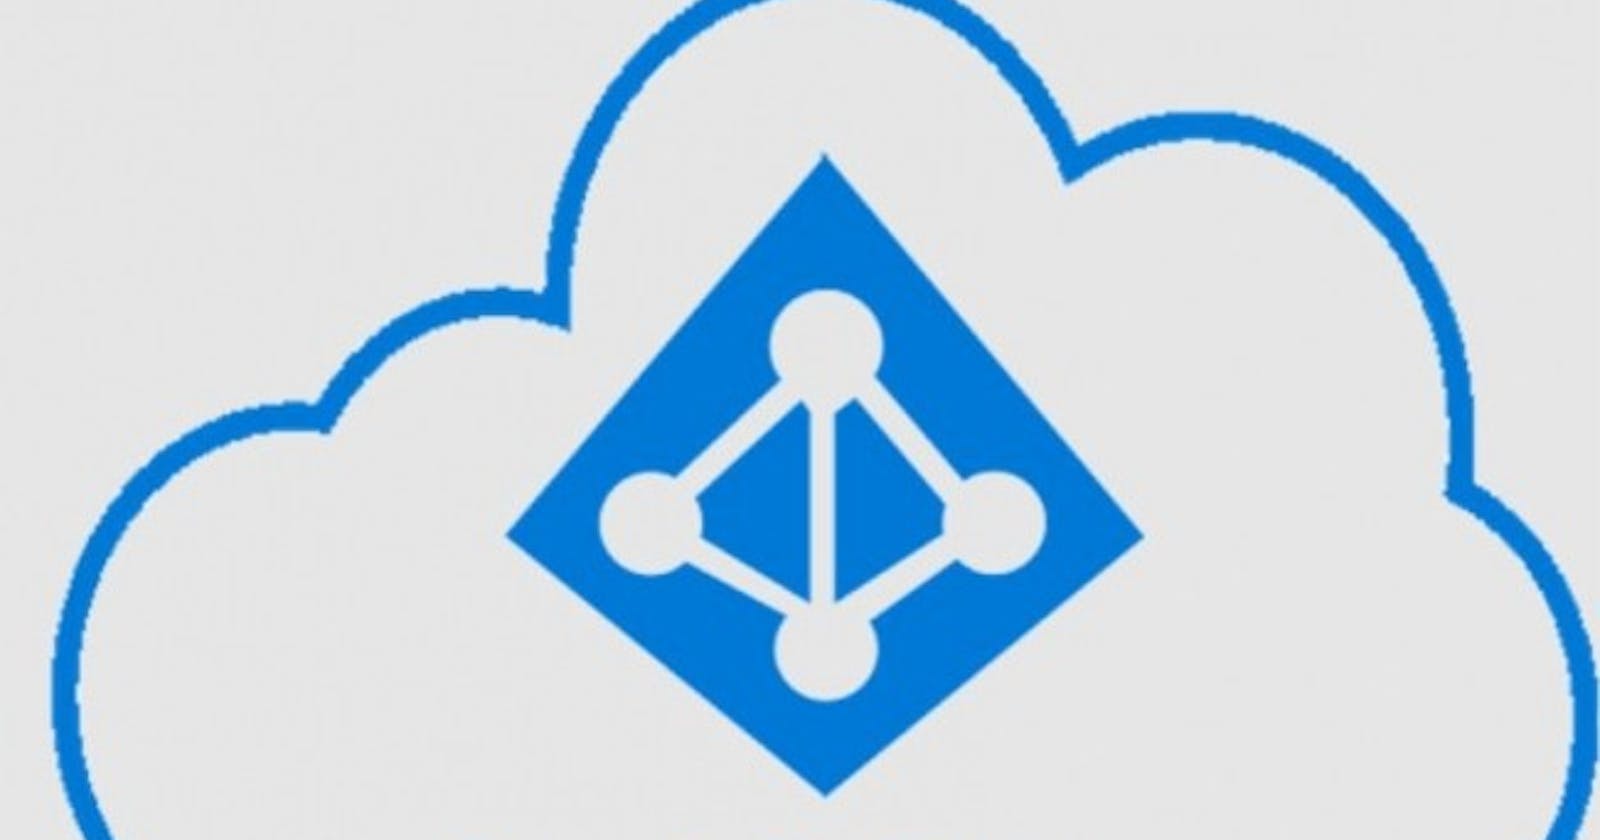 Azure Active Directory: Interview Questions and Answers